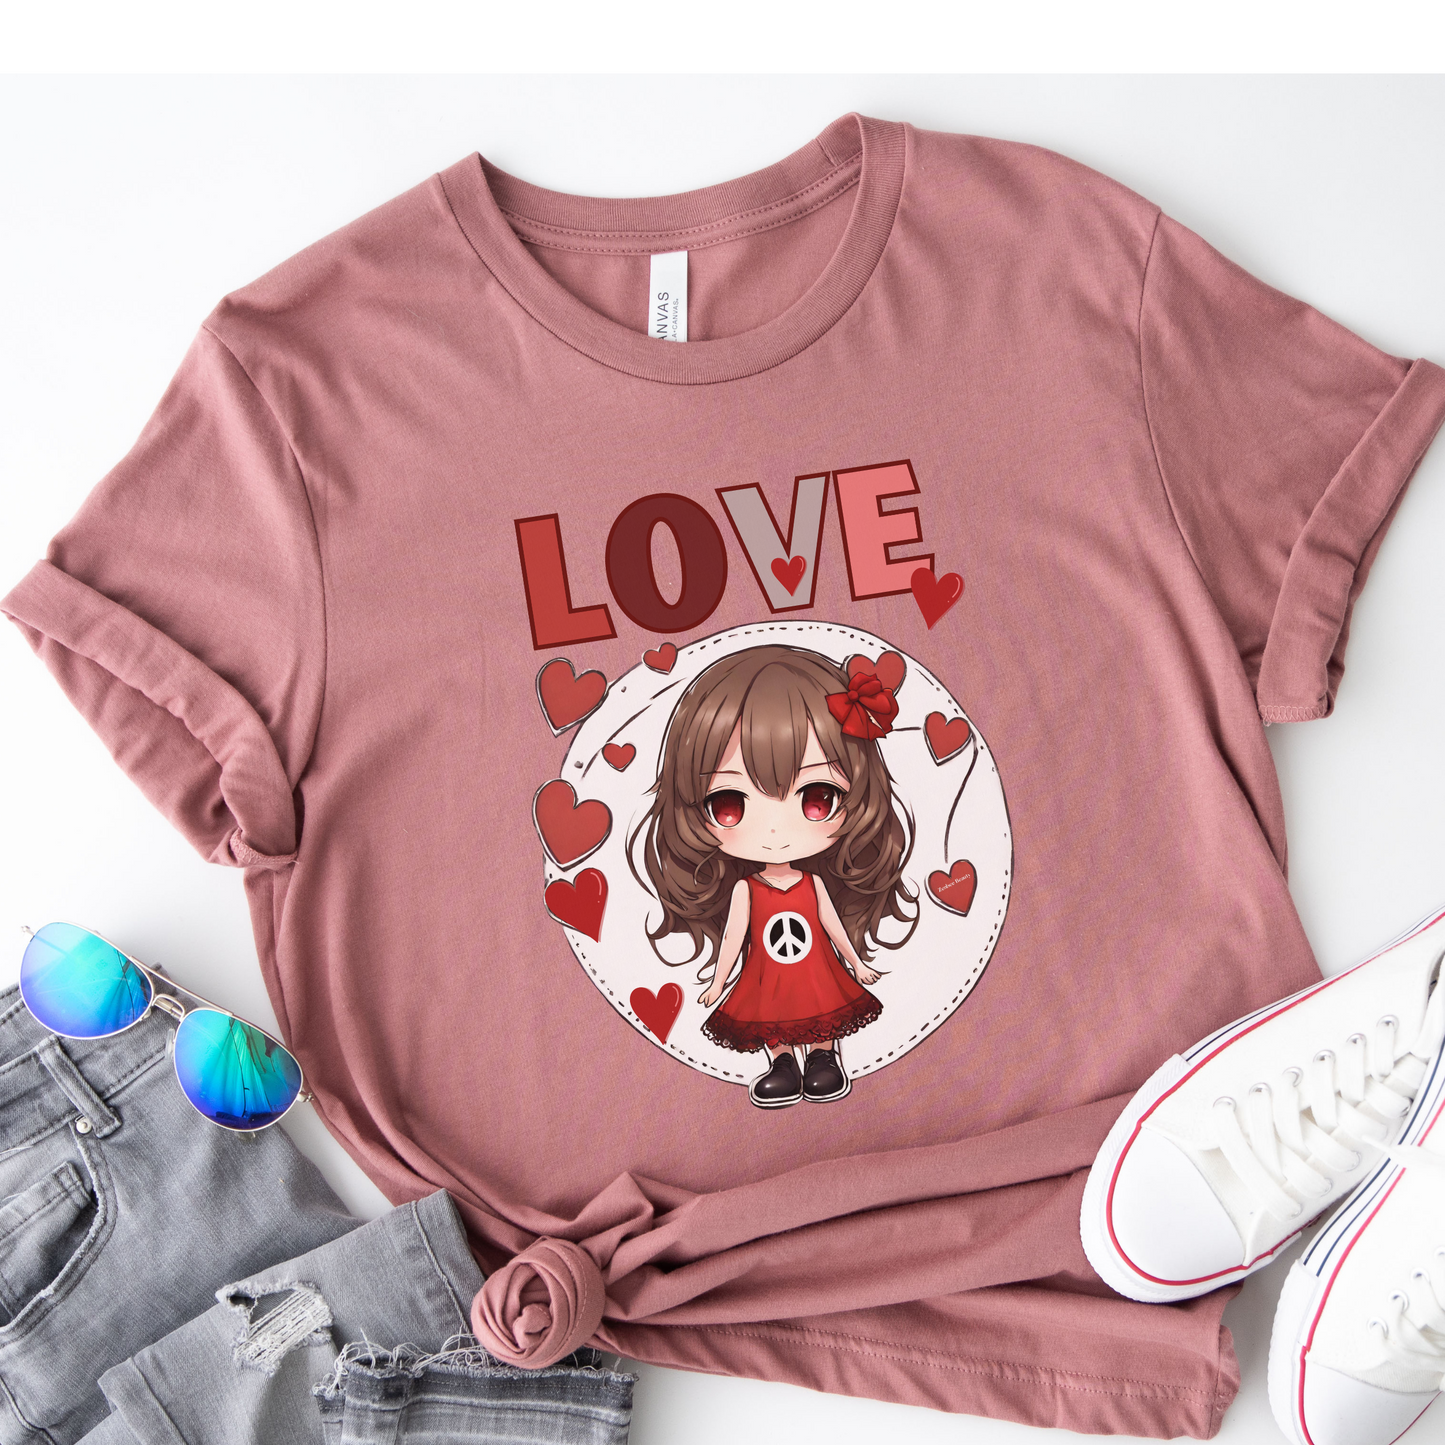 Valentine's Love Tshirt, Valentine shirt, Valentine's day tee, Graphic Tshirt, love t-shirts, Valentine gift, Love Tee, Tshirt for her,